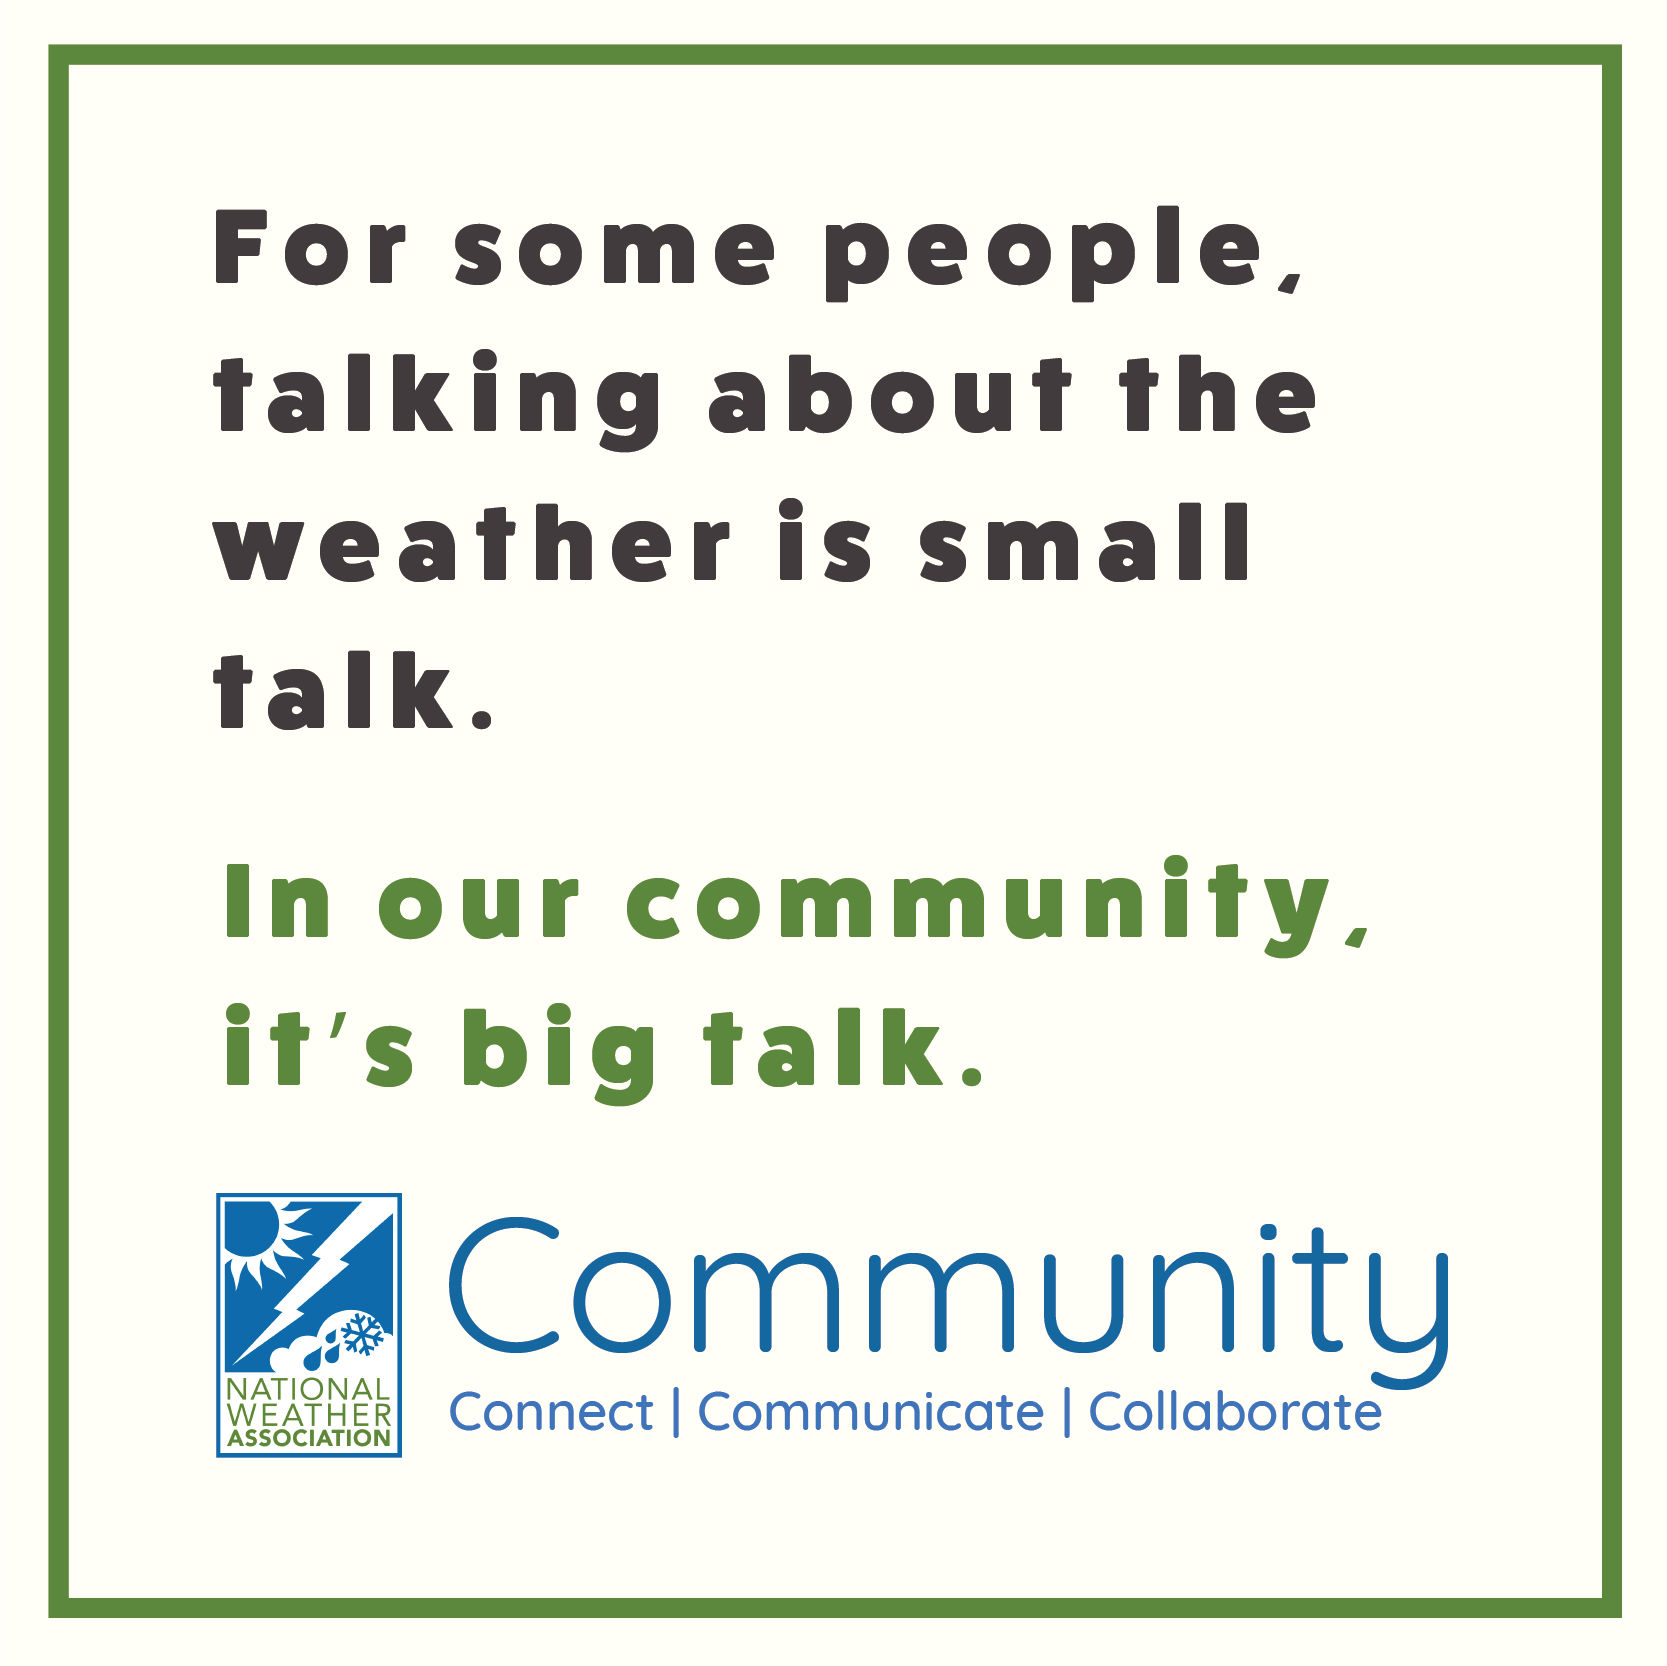 For some people, talking about the weather is small talk. In our community, it's big talk. 